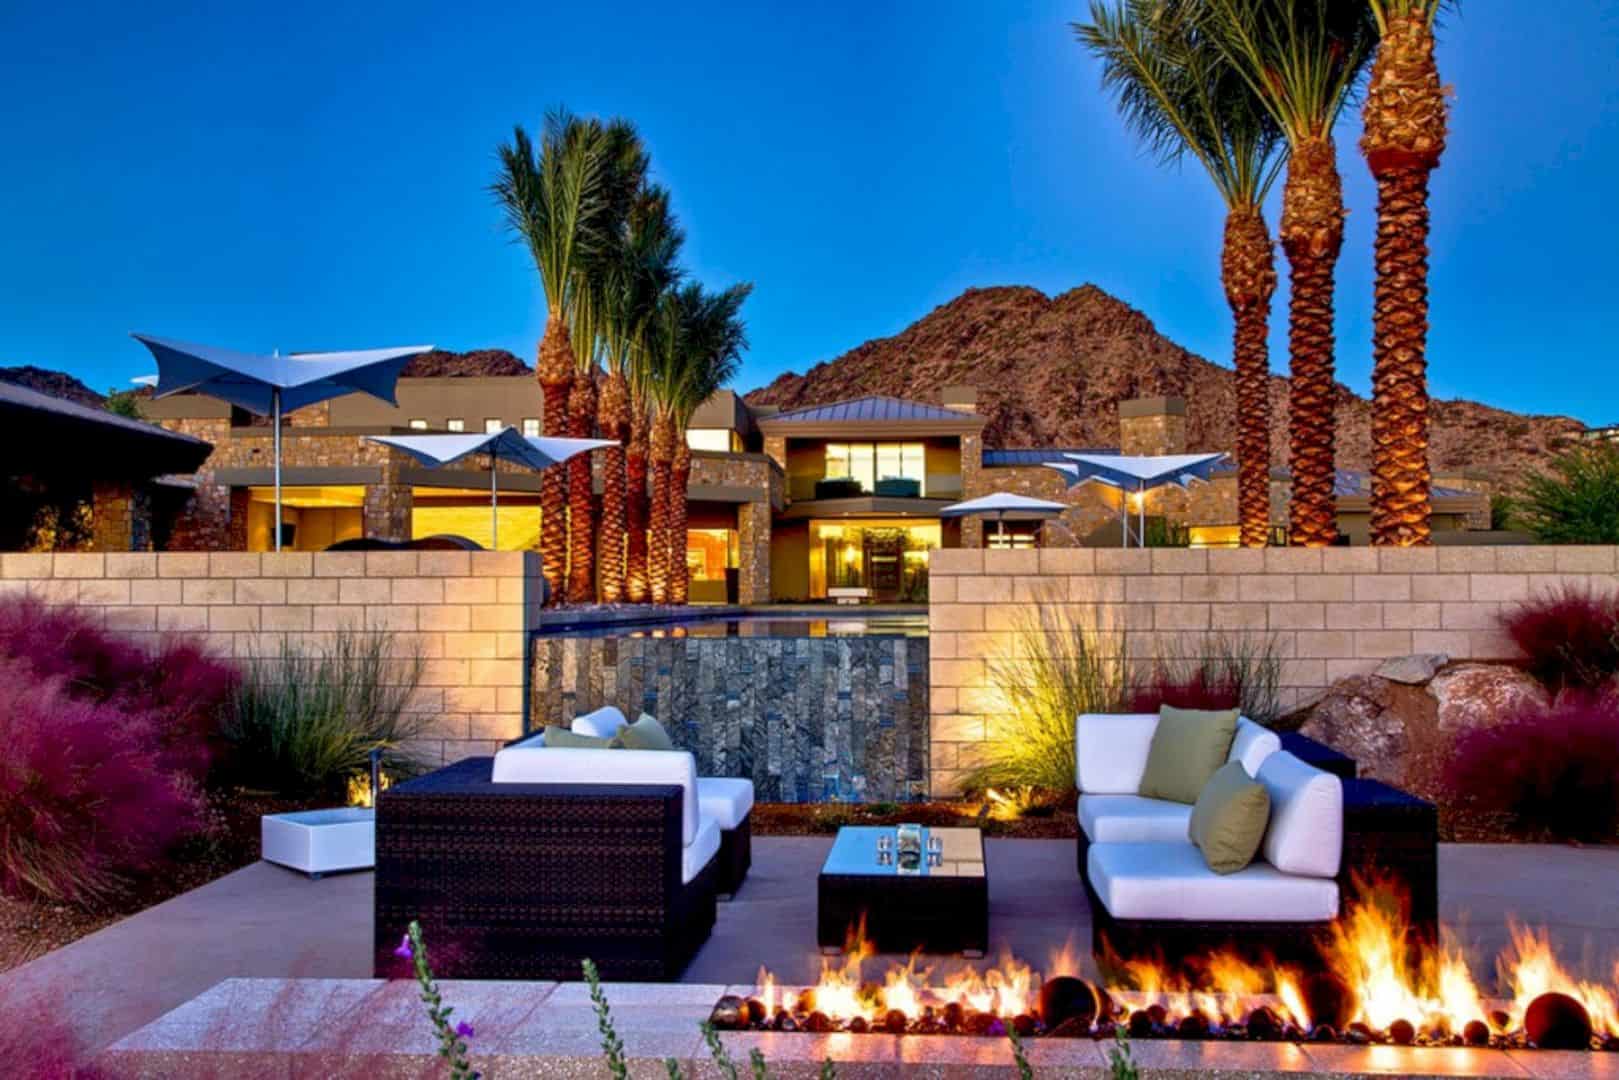 Ironwood Estate A Sophisticated Contemporary Residence In Paradise Valley 23